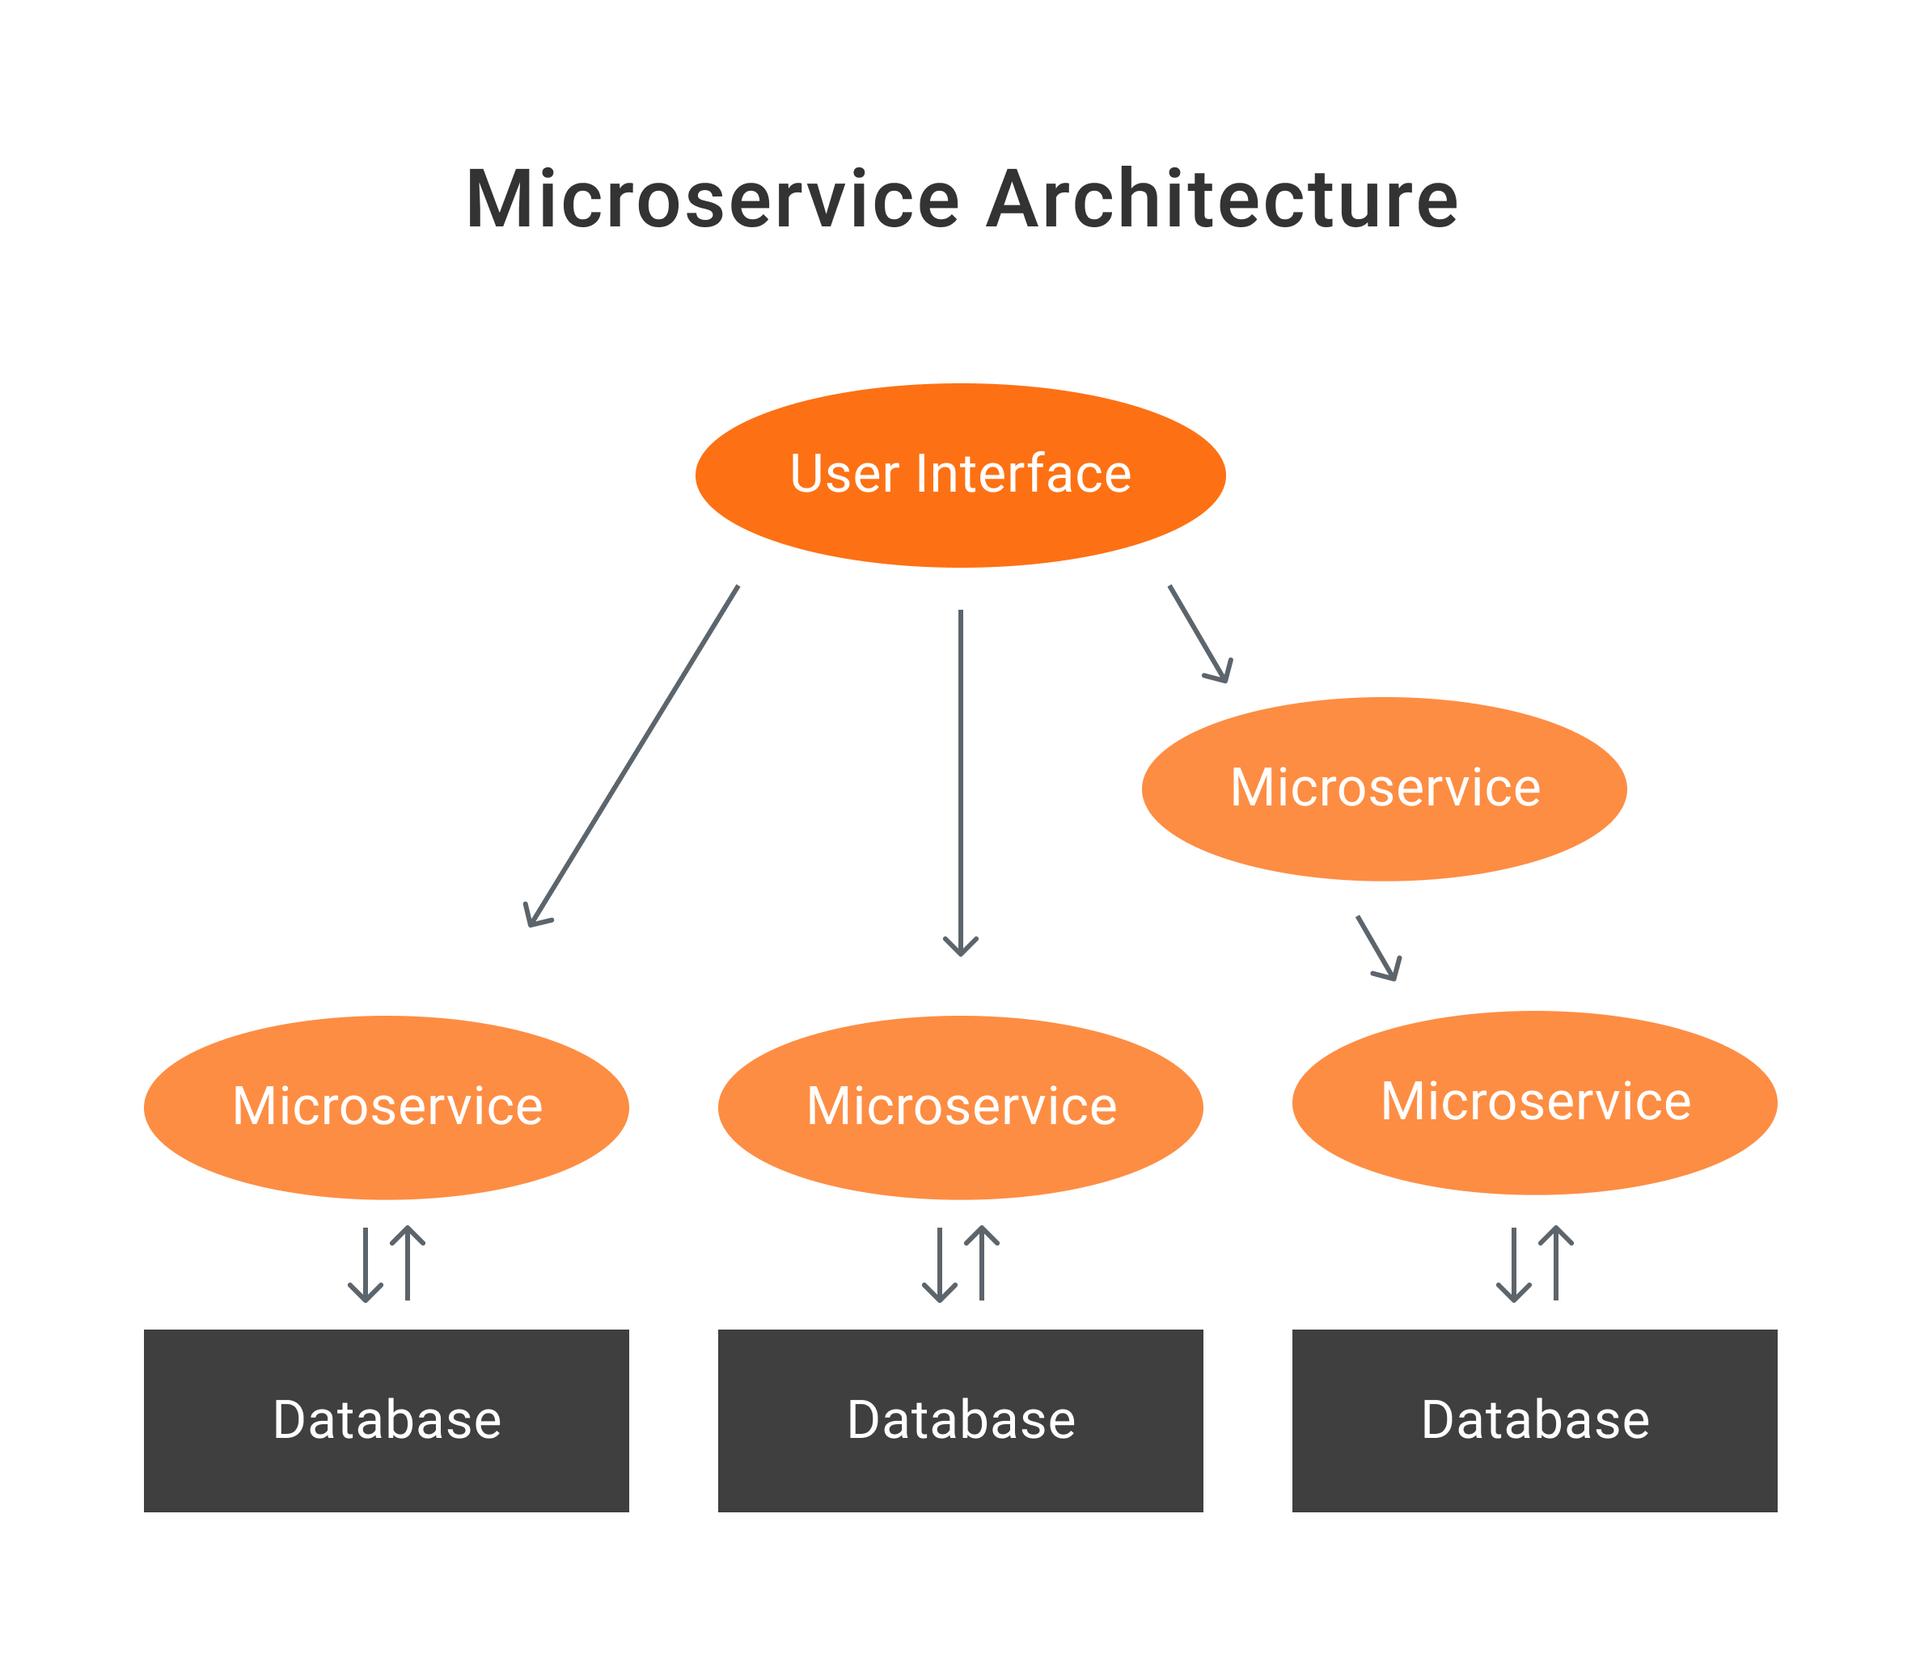 Application modernization services: Transforming monolithic, legacy applications into microservices